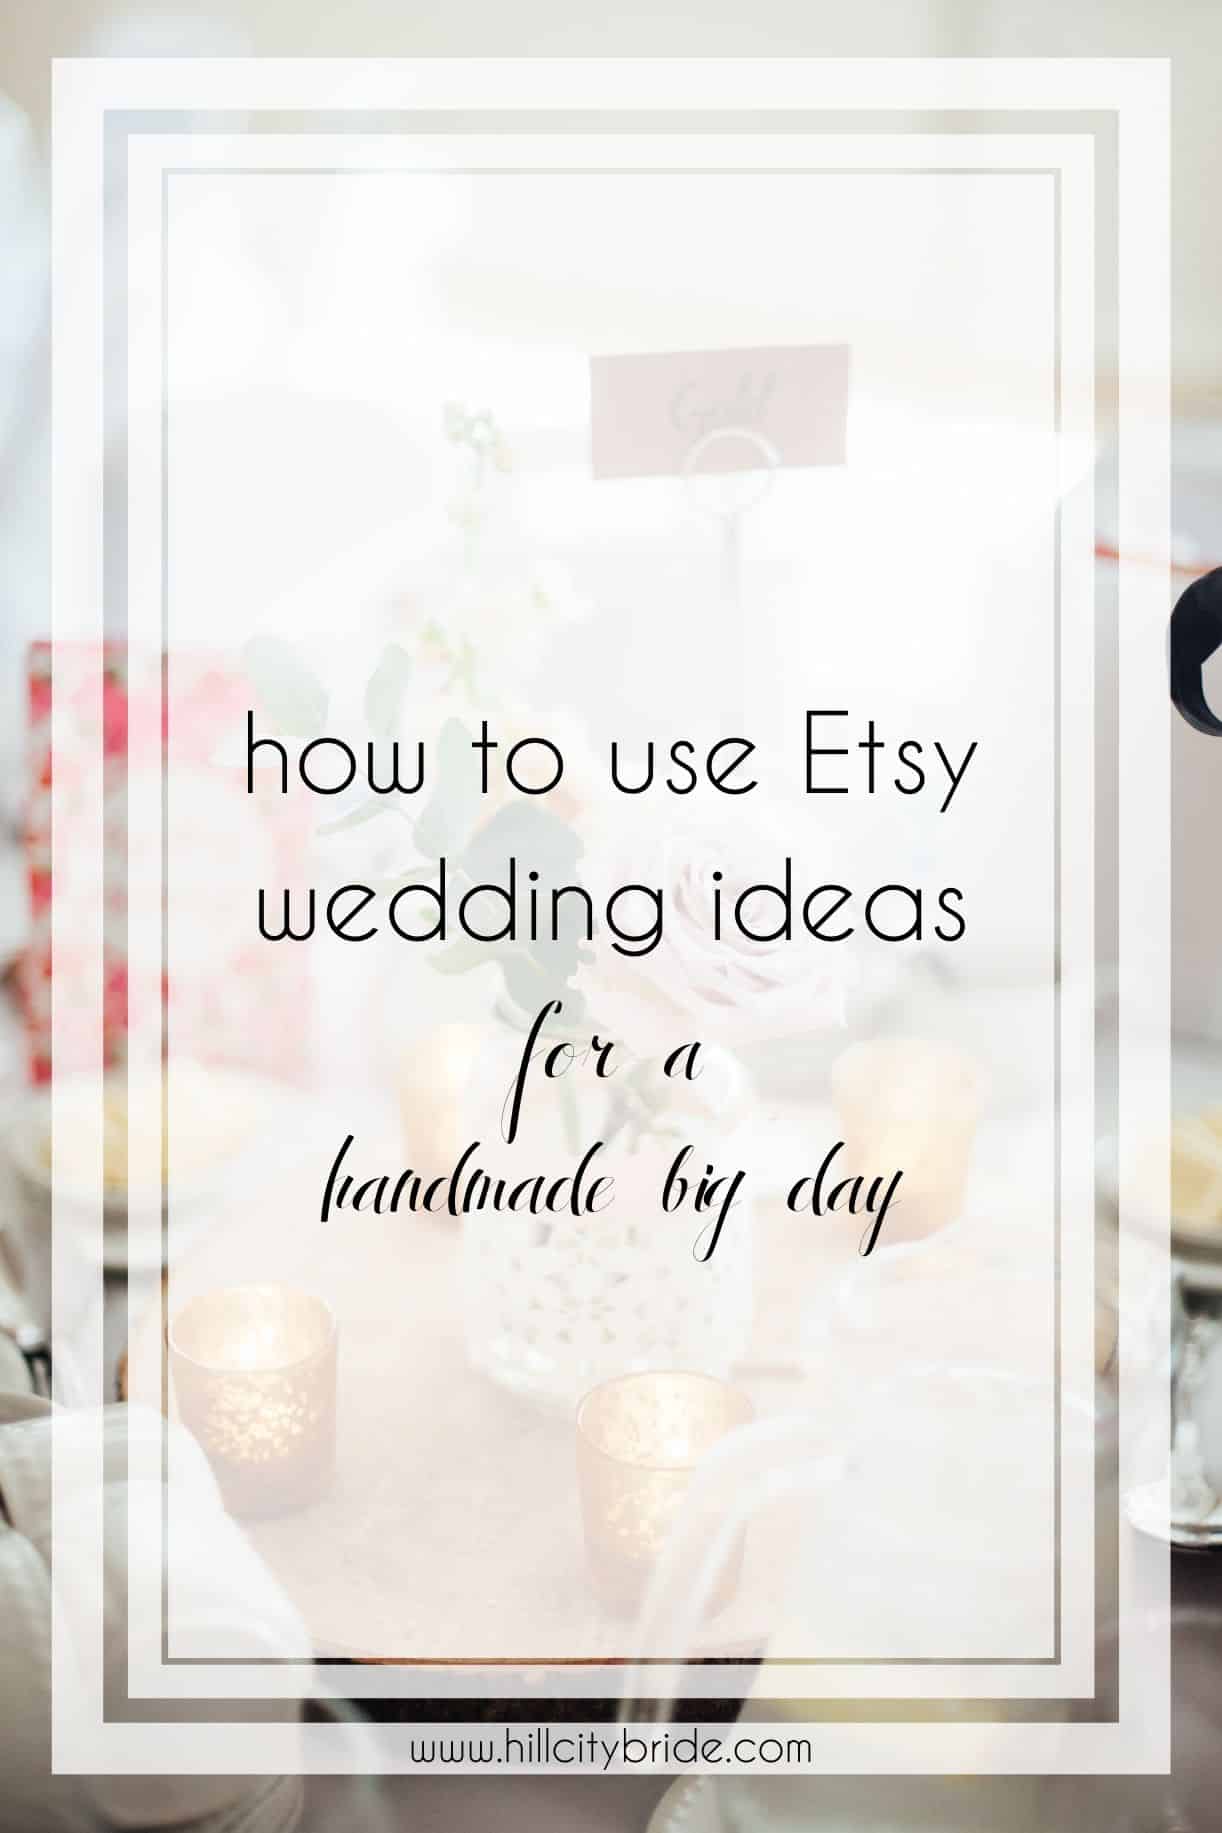 How to Include Etsy Wedding Ideas on Your Big Day